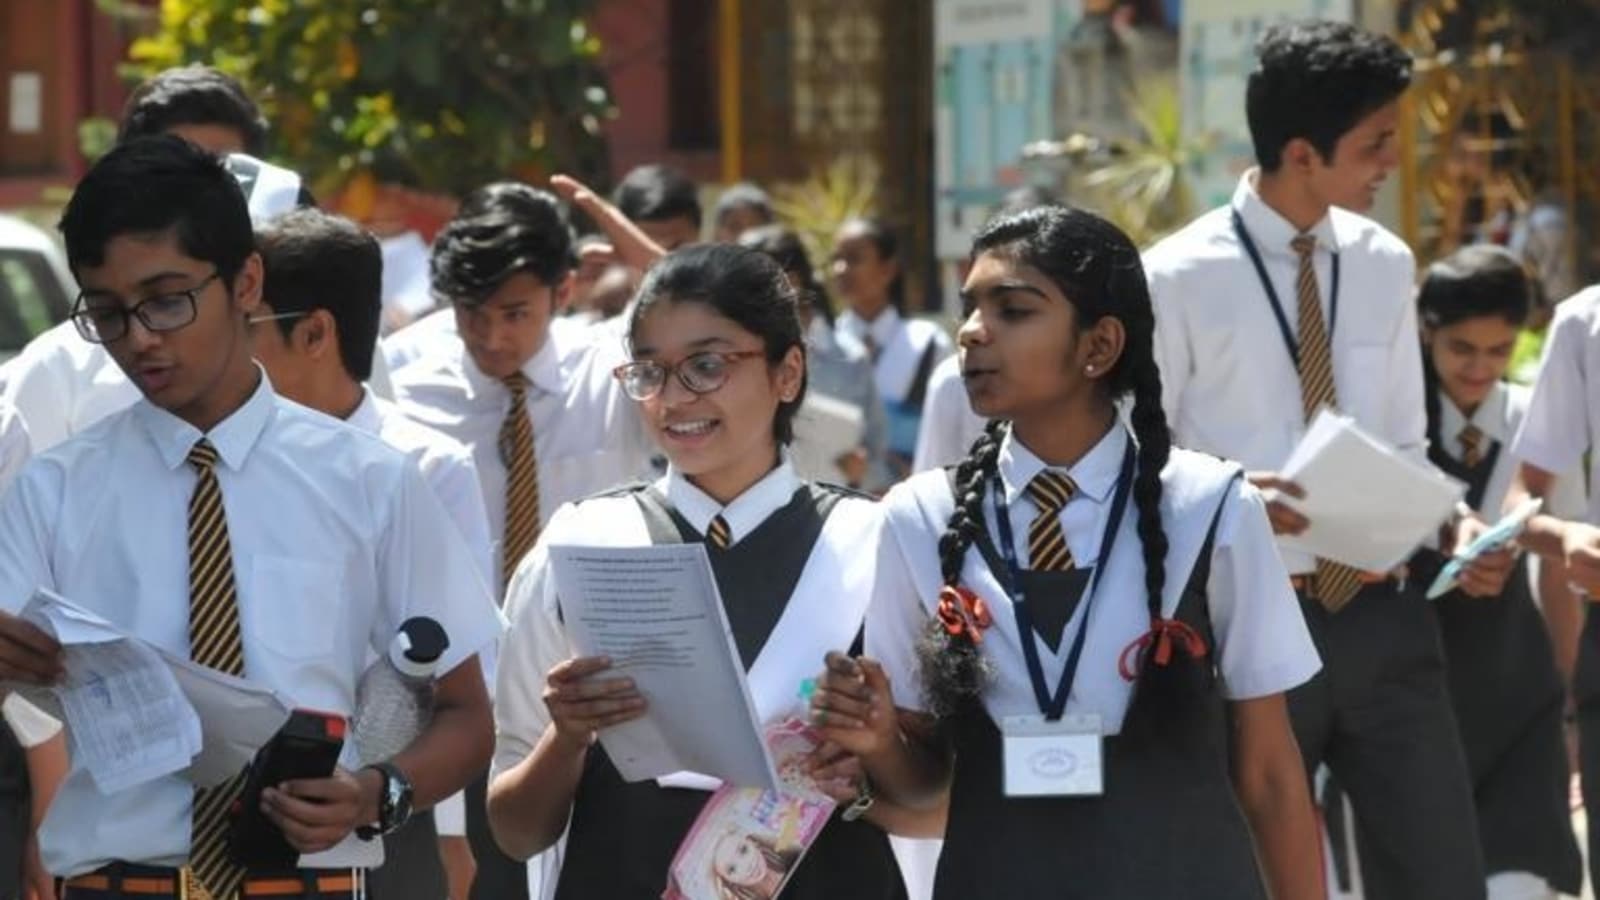 Uttarakhand 10th, 12th results 2021 Live: UK Board class 10, 12 marks today